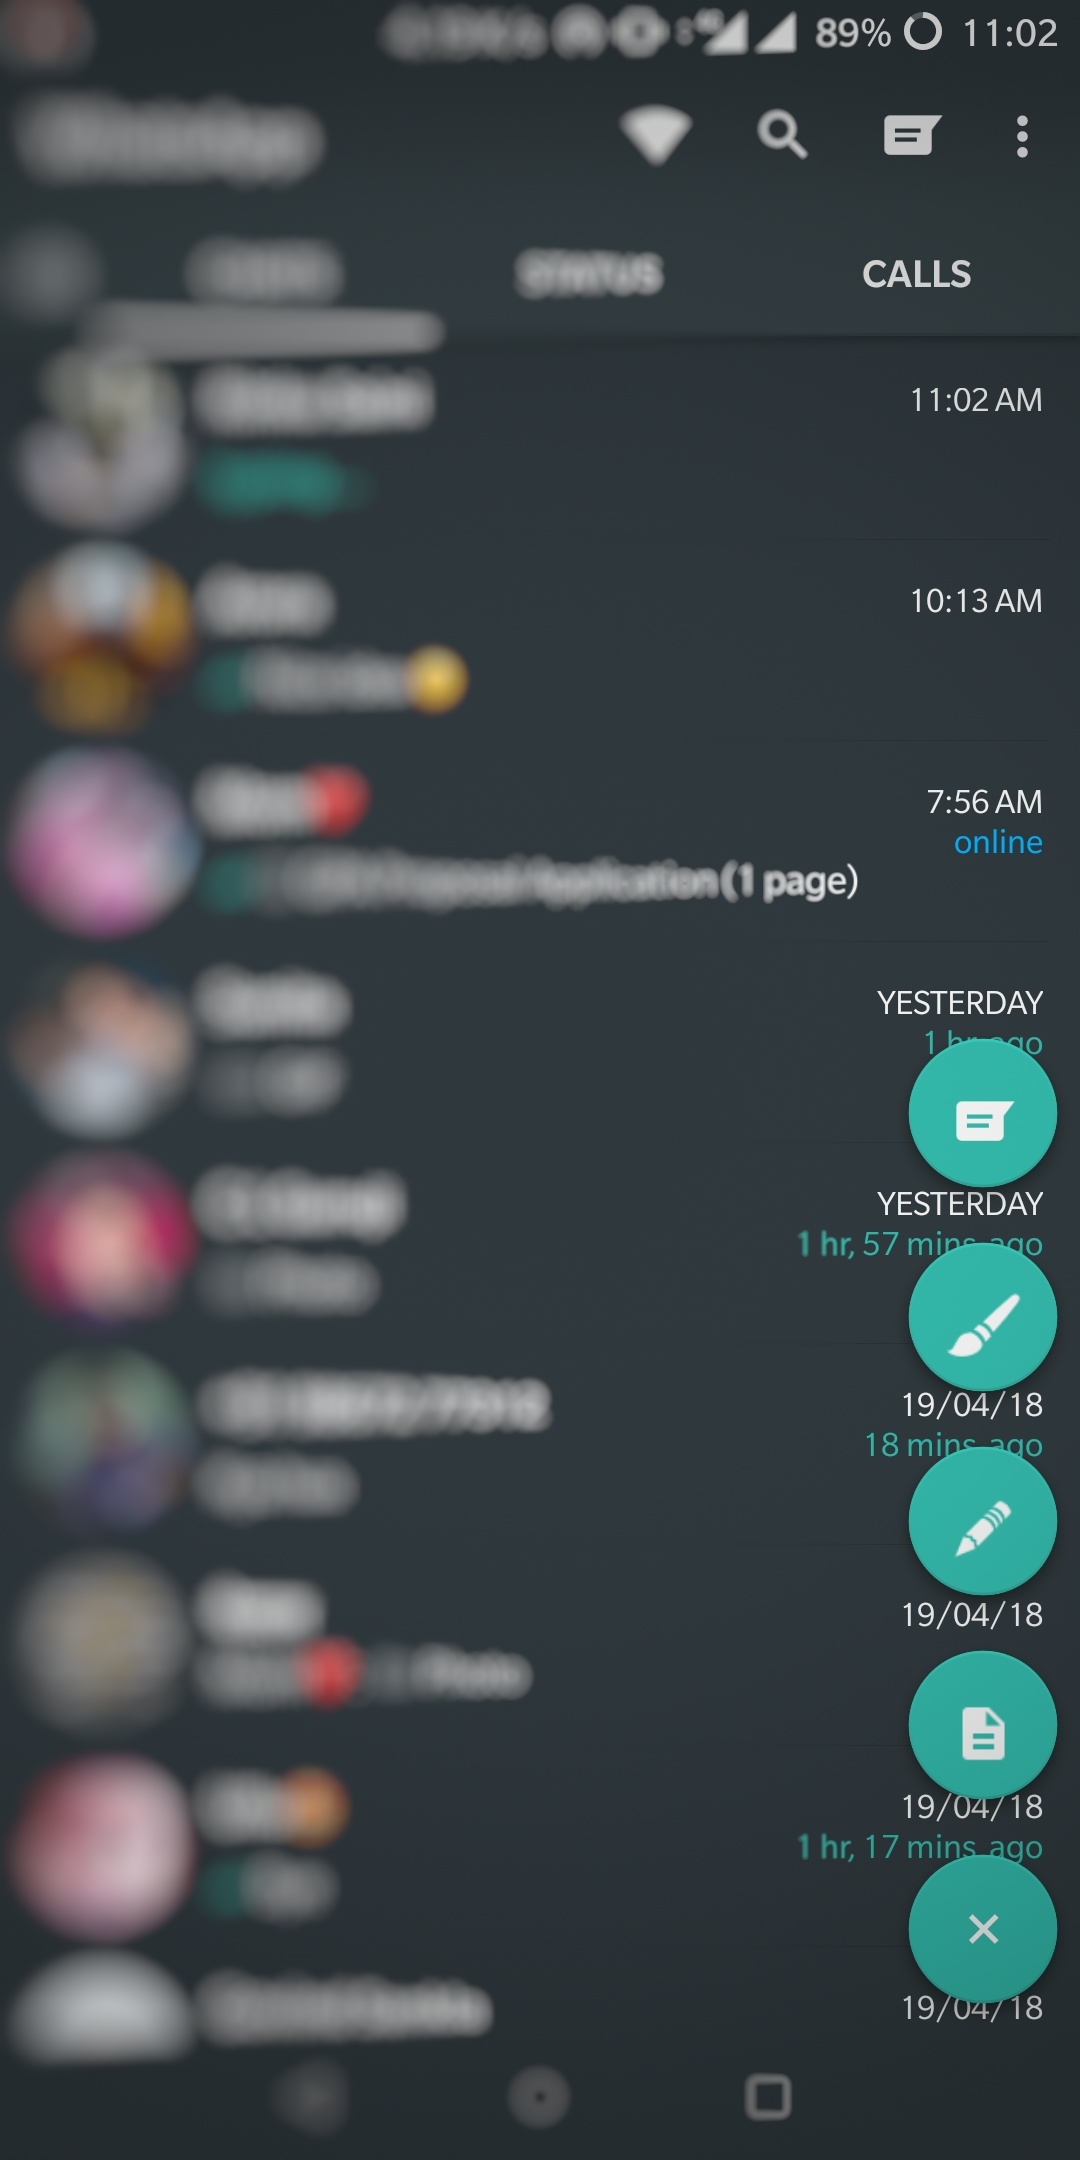 Gbwhatsapp apk download latest version 6.90 for android 2019